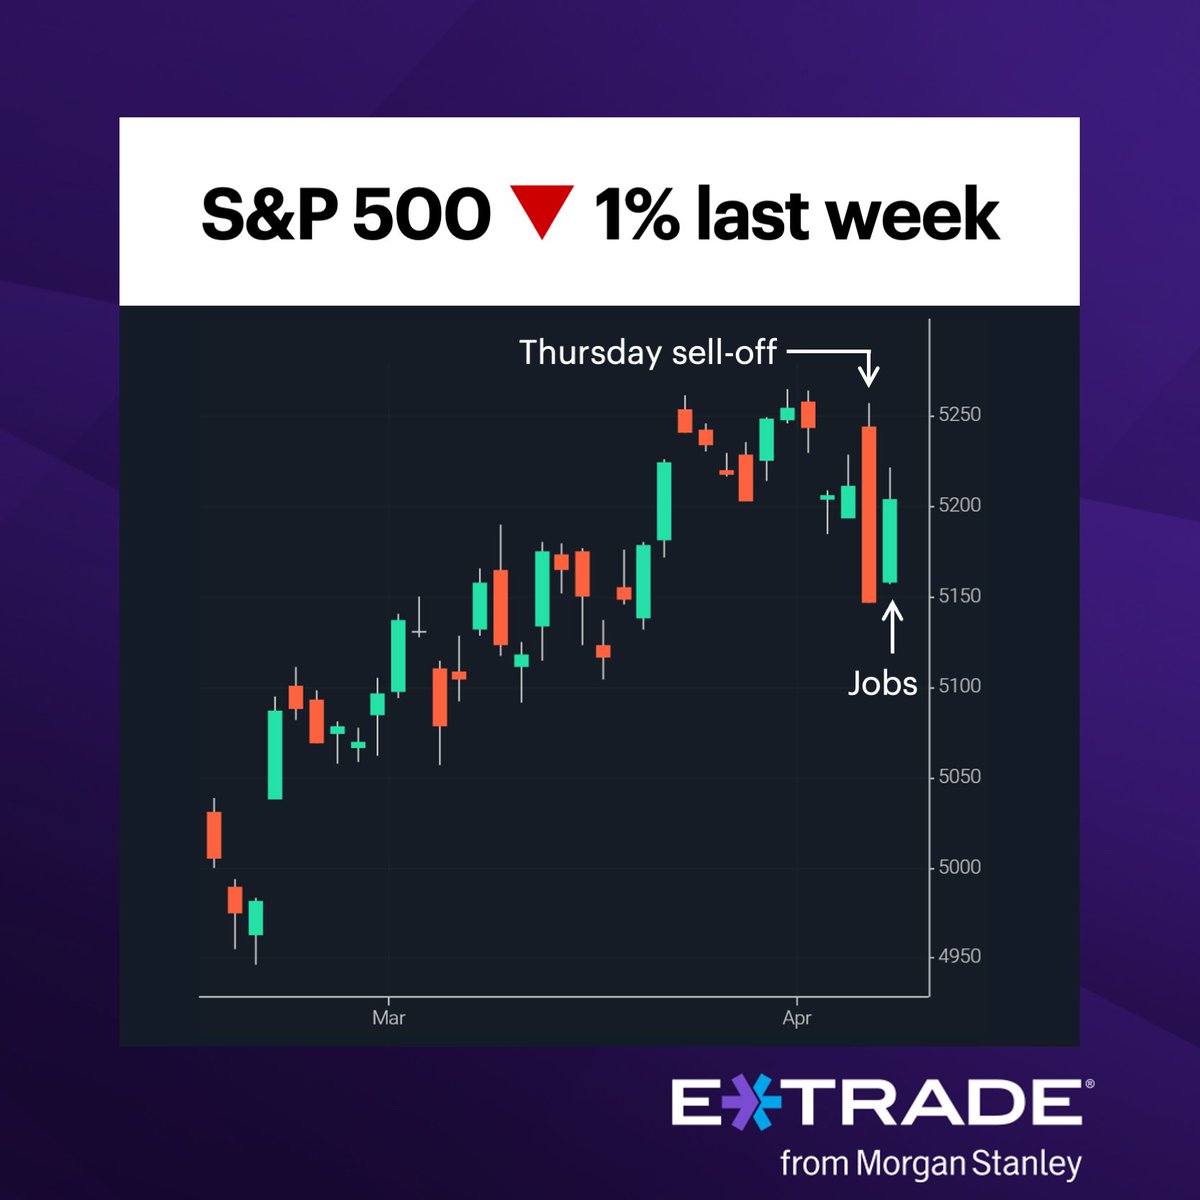 #ActiveTrader: Find out what traders will be focusing on after last week’s jobs report surprise. bit.ly/3PVpQVM